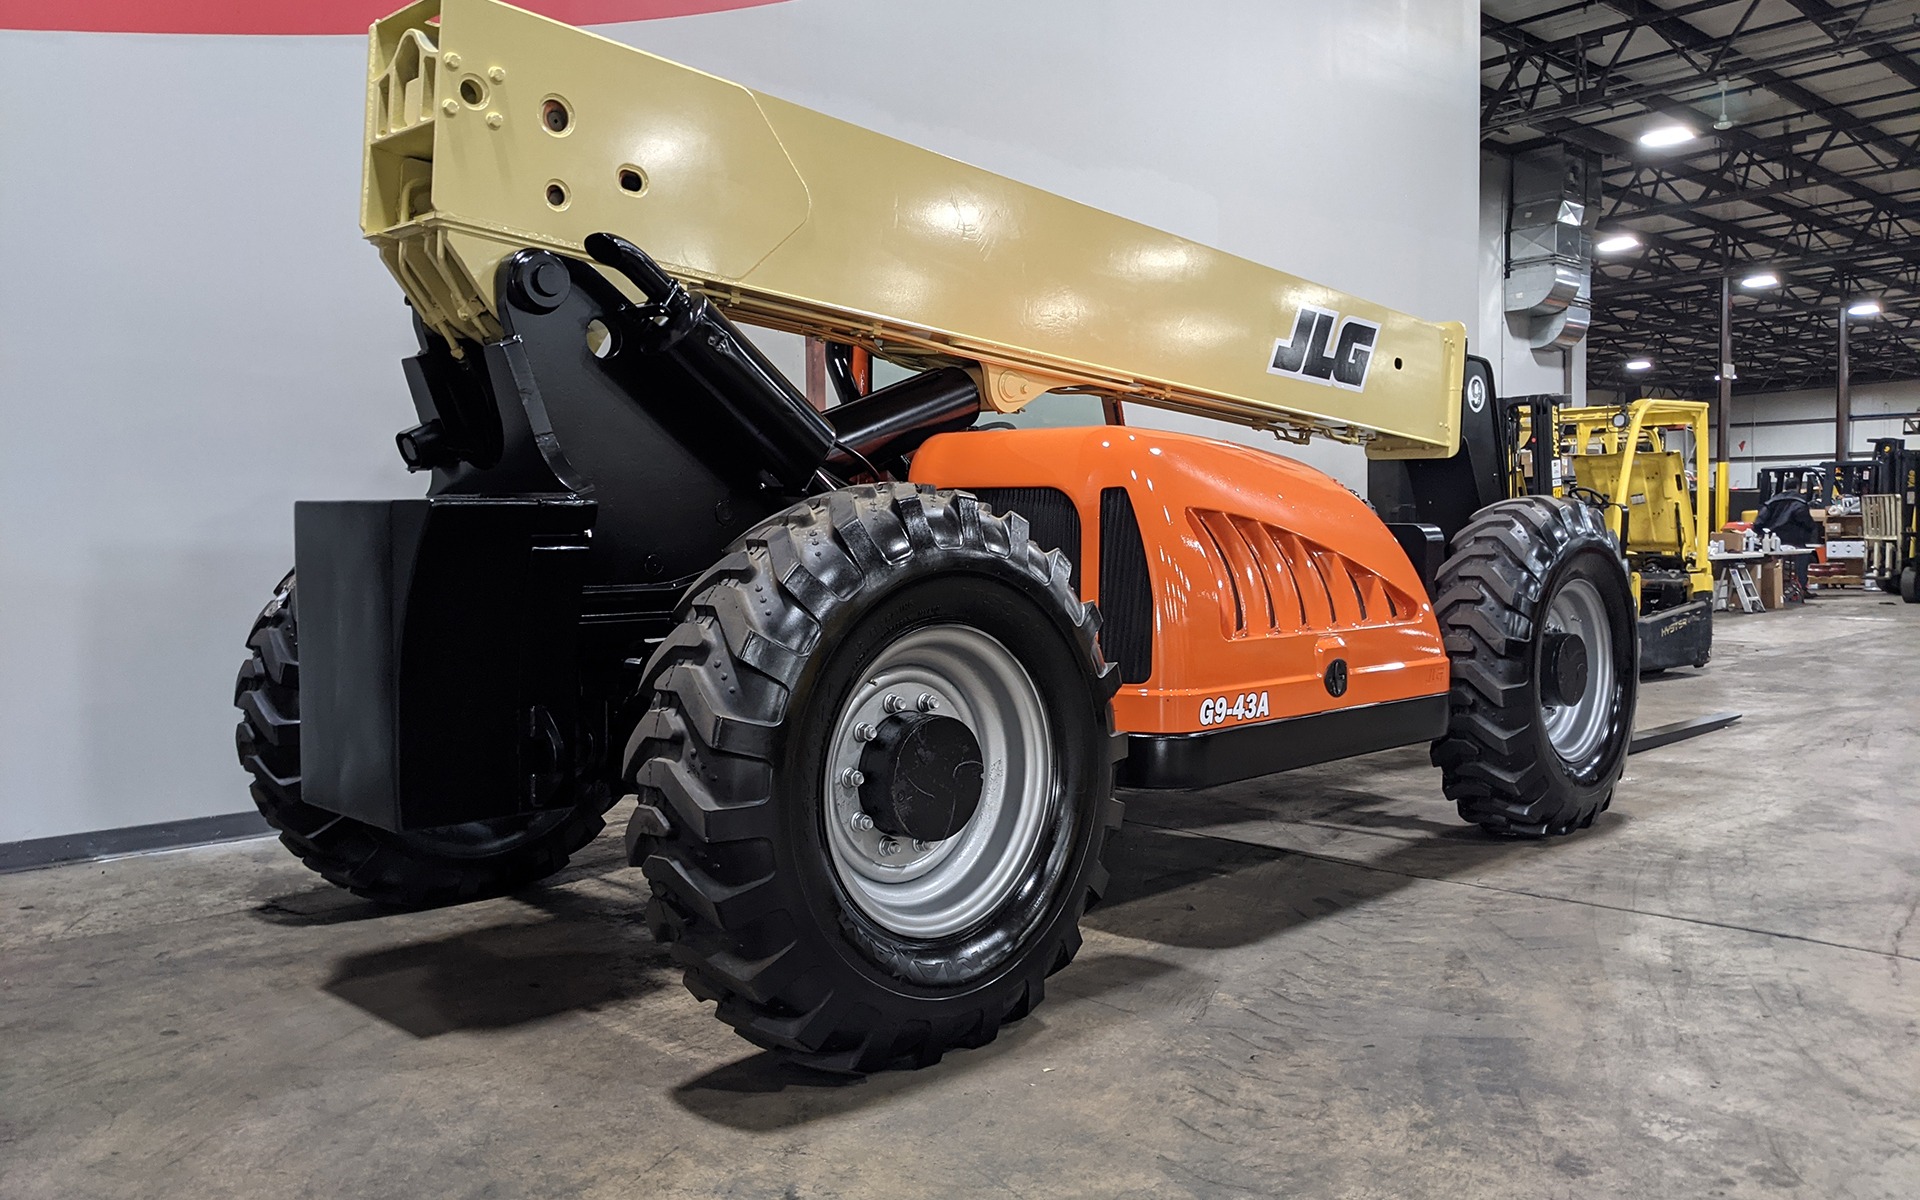 Used 2006 JLG G9-43A  | Cary, IL